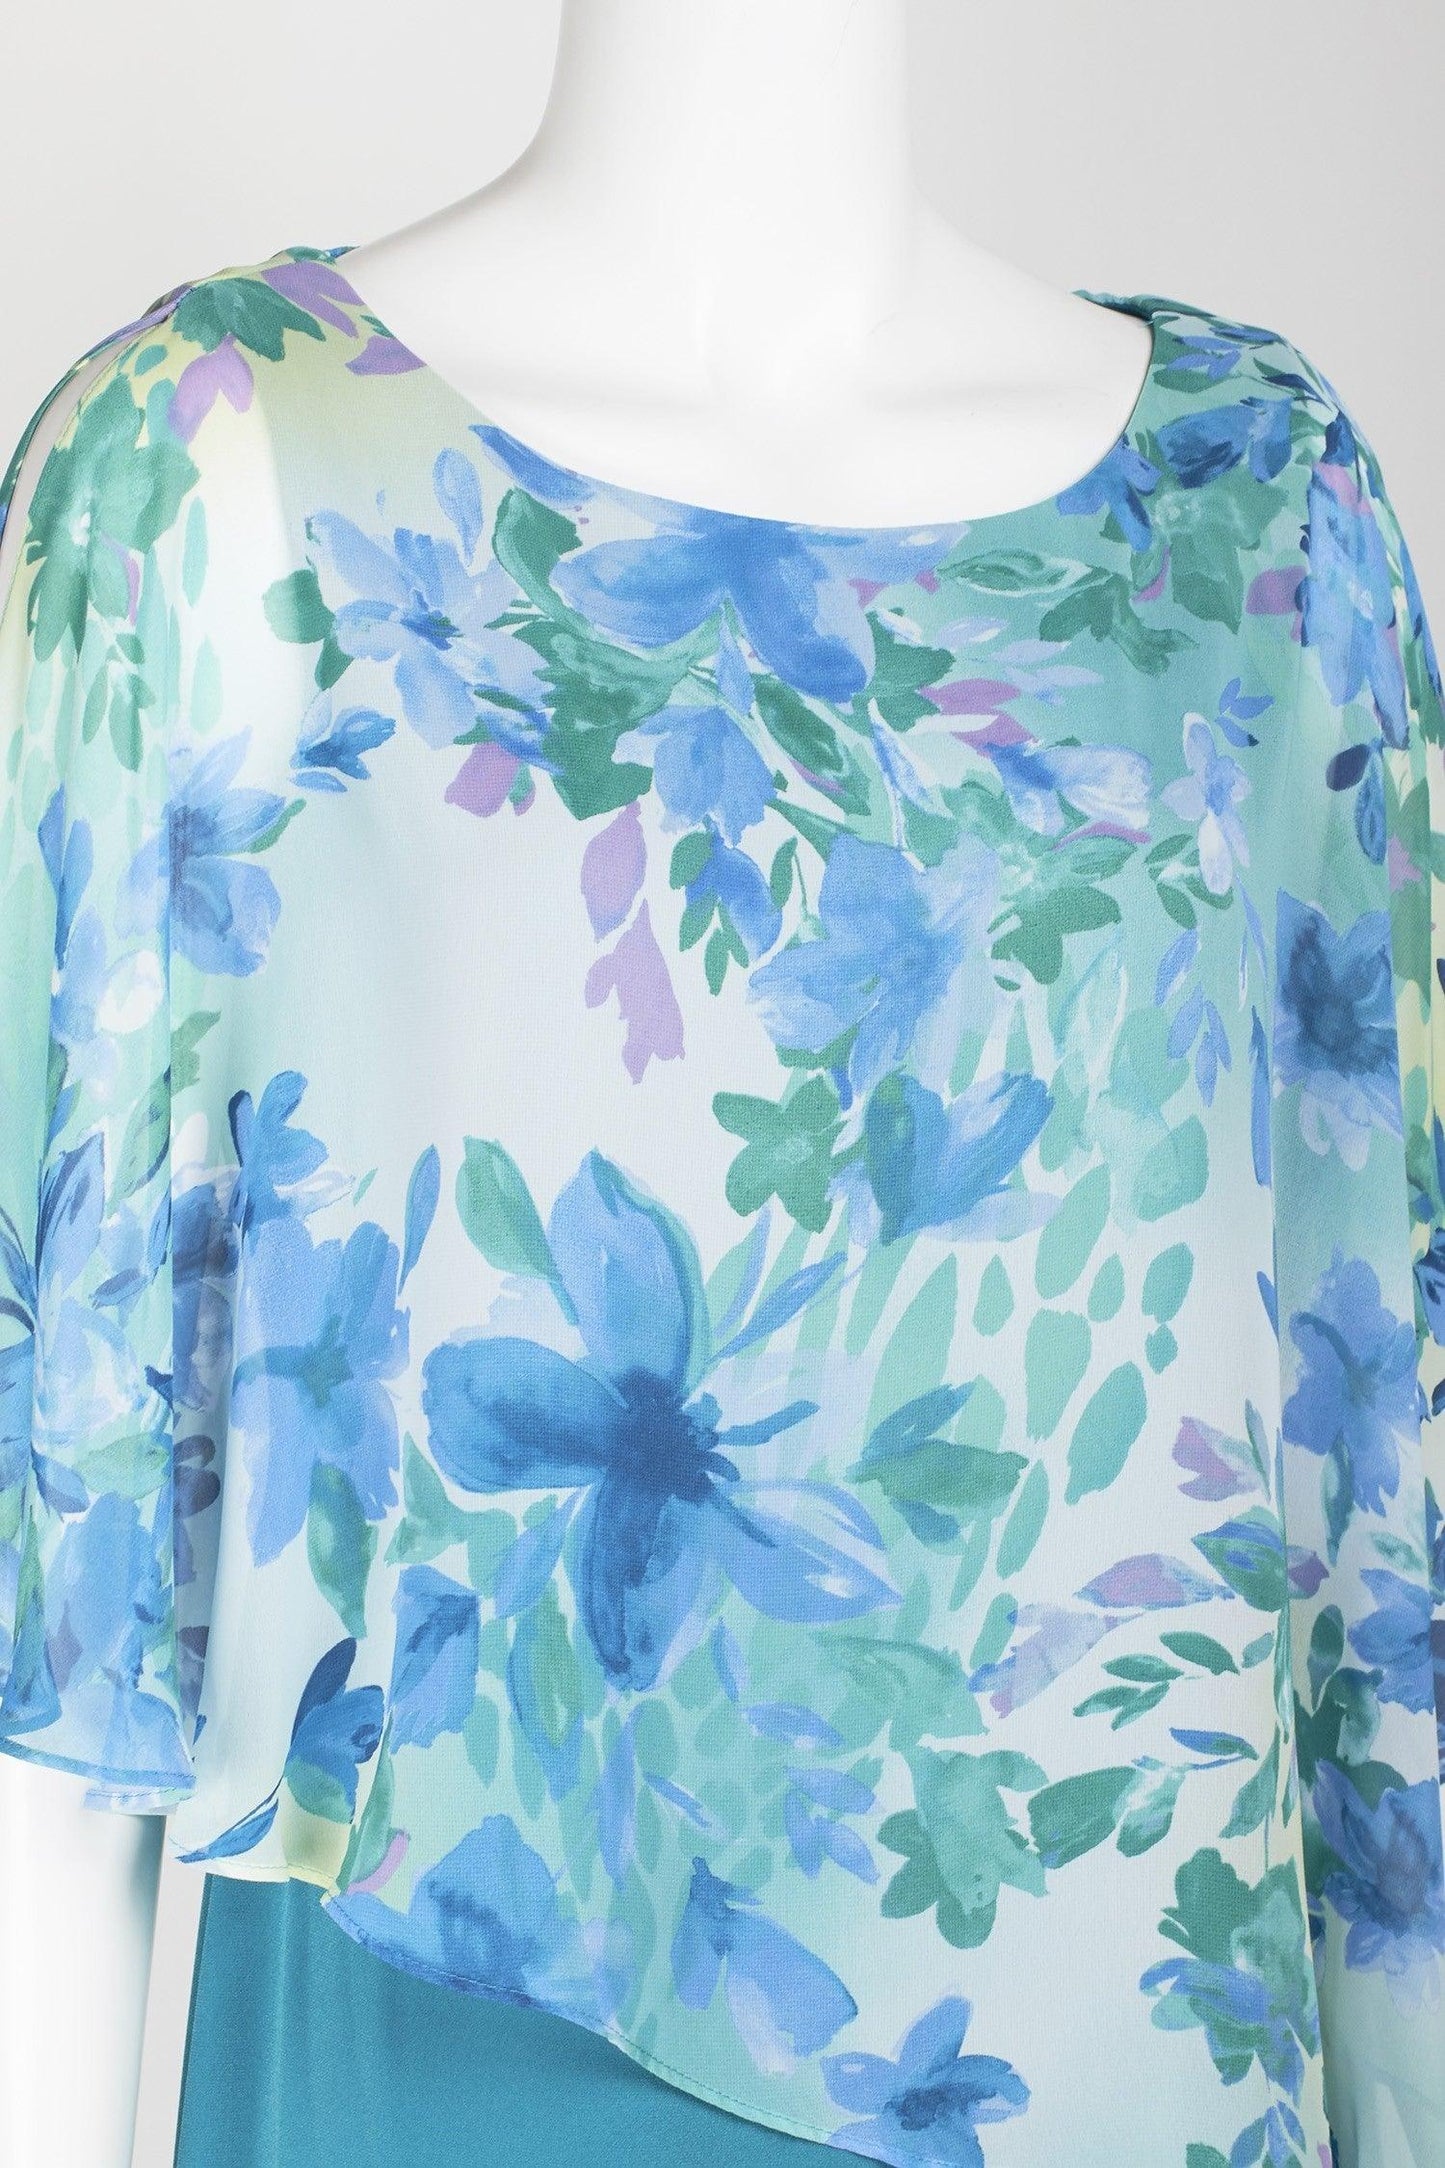 Connected Apparel Floral Print Short Chiffon Dress - The Dress Outlet